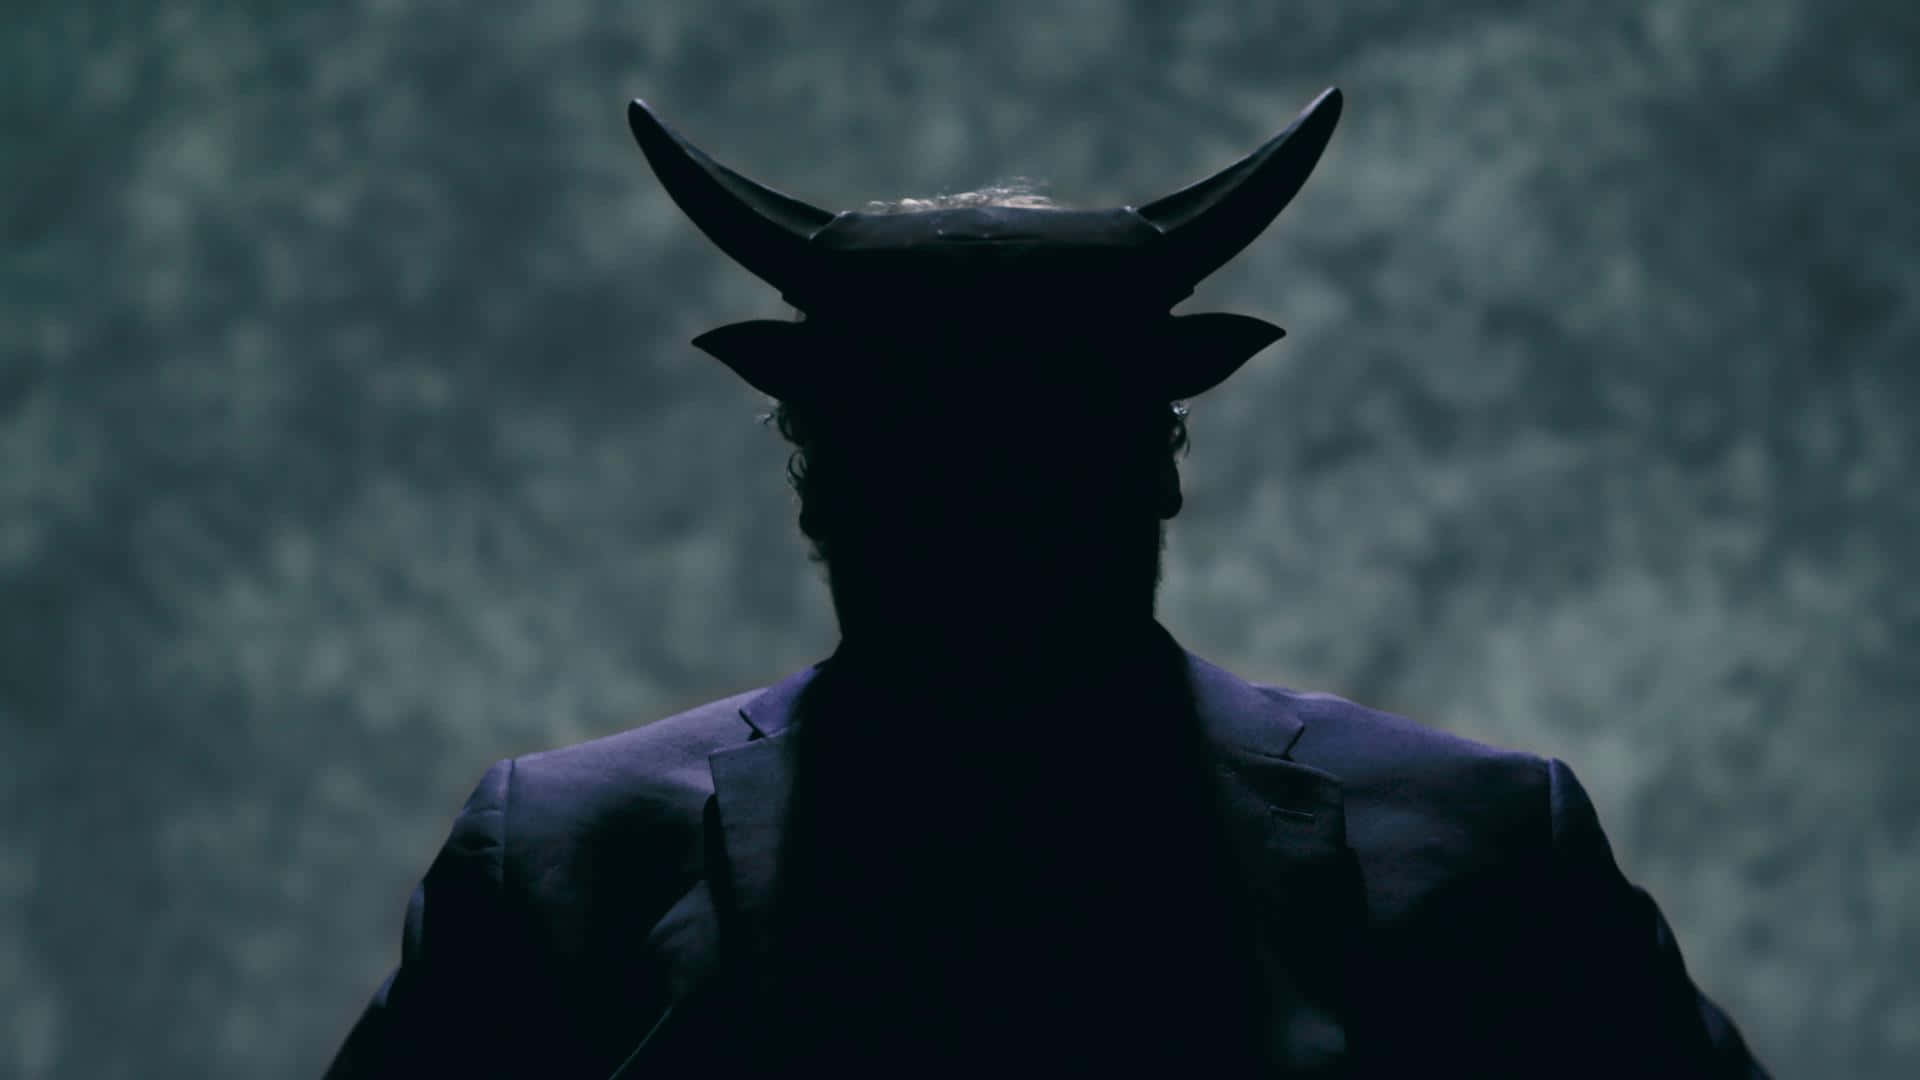 A Man In A Suit With Horns On His Head